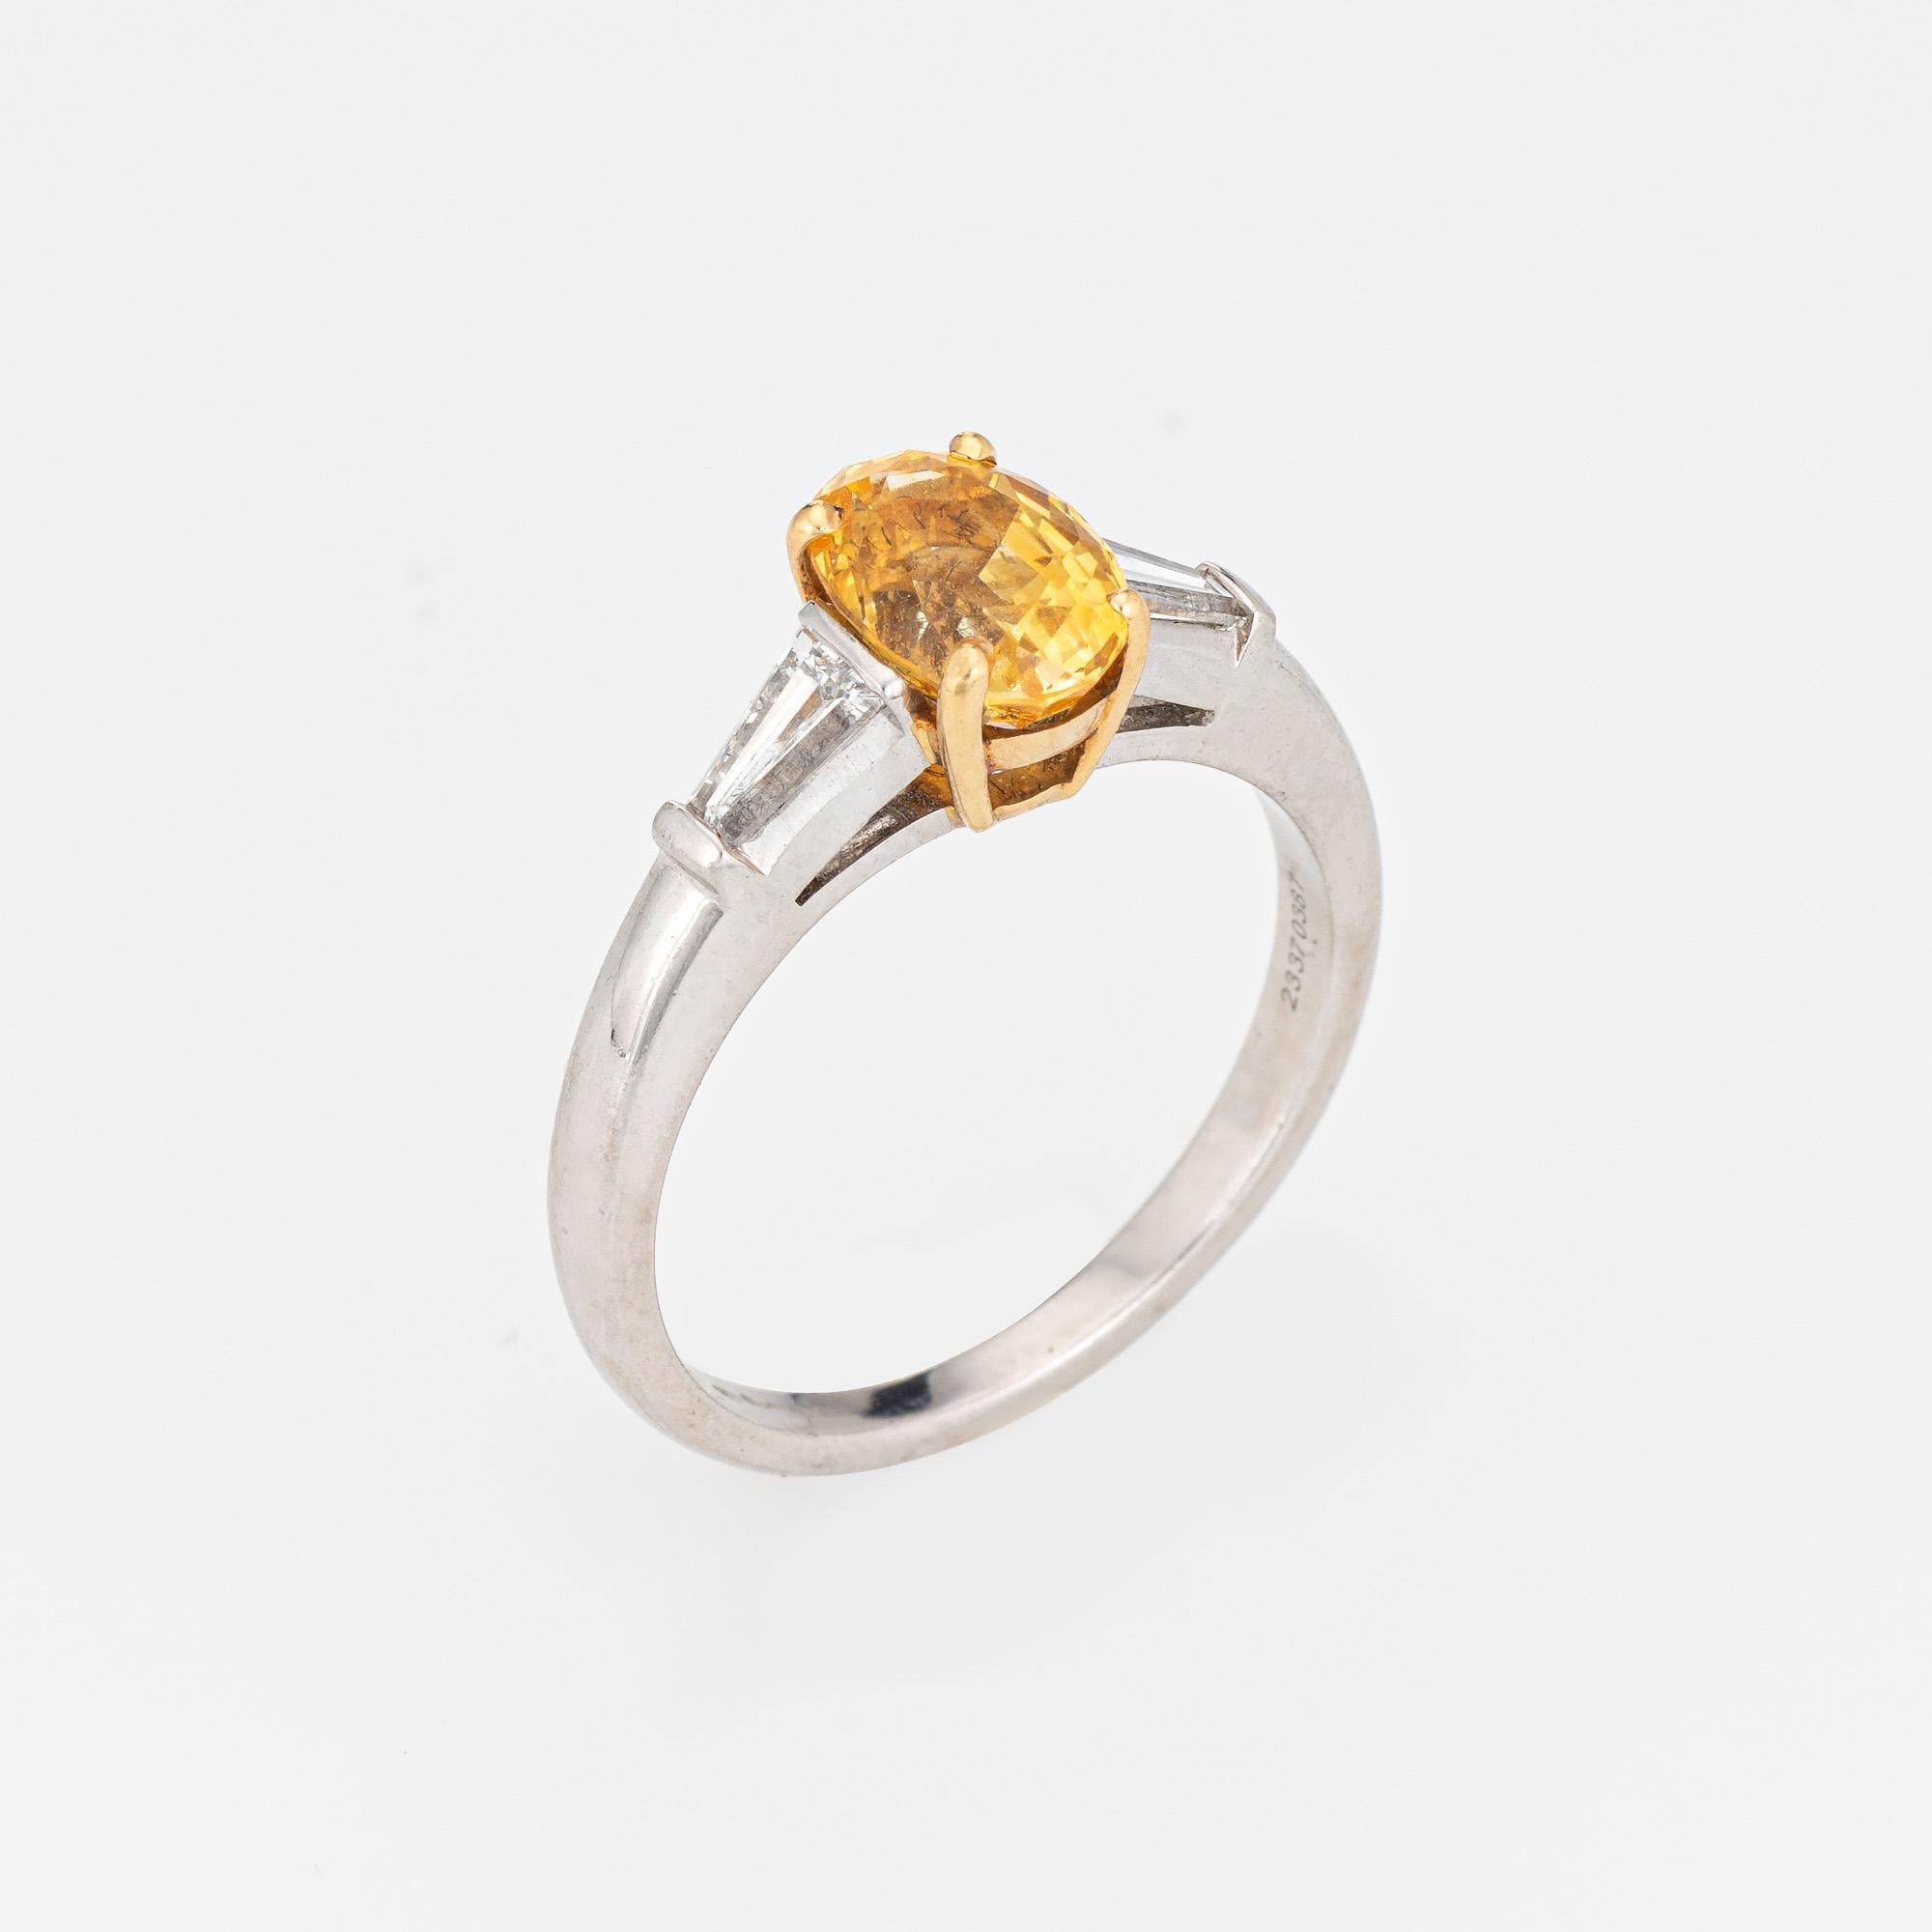 Estate Tiffany & Co yellow sapphire & diamond ring crafted in platinum & 18 karat yellow gold (circa 1990s to 2000s).  

Oval faceted yellow sapphire measures 7.8mm x 5.6mm (estimated at 2 carats). Two baguette diamonds are estimated at 0.10 carats